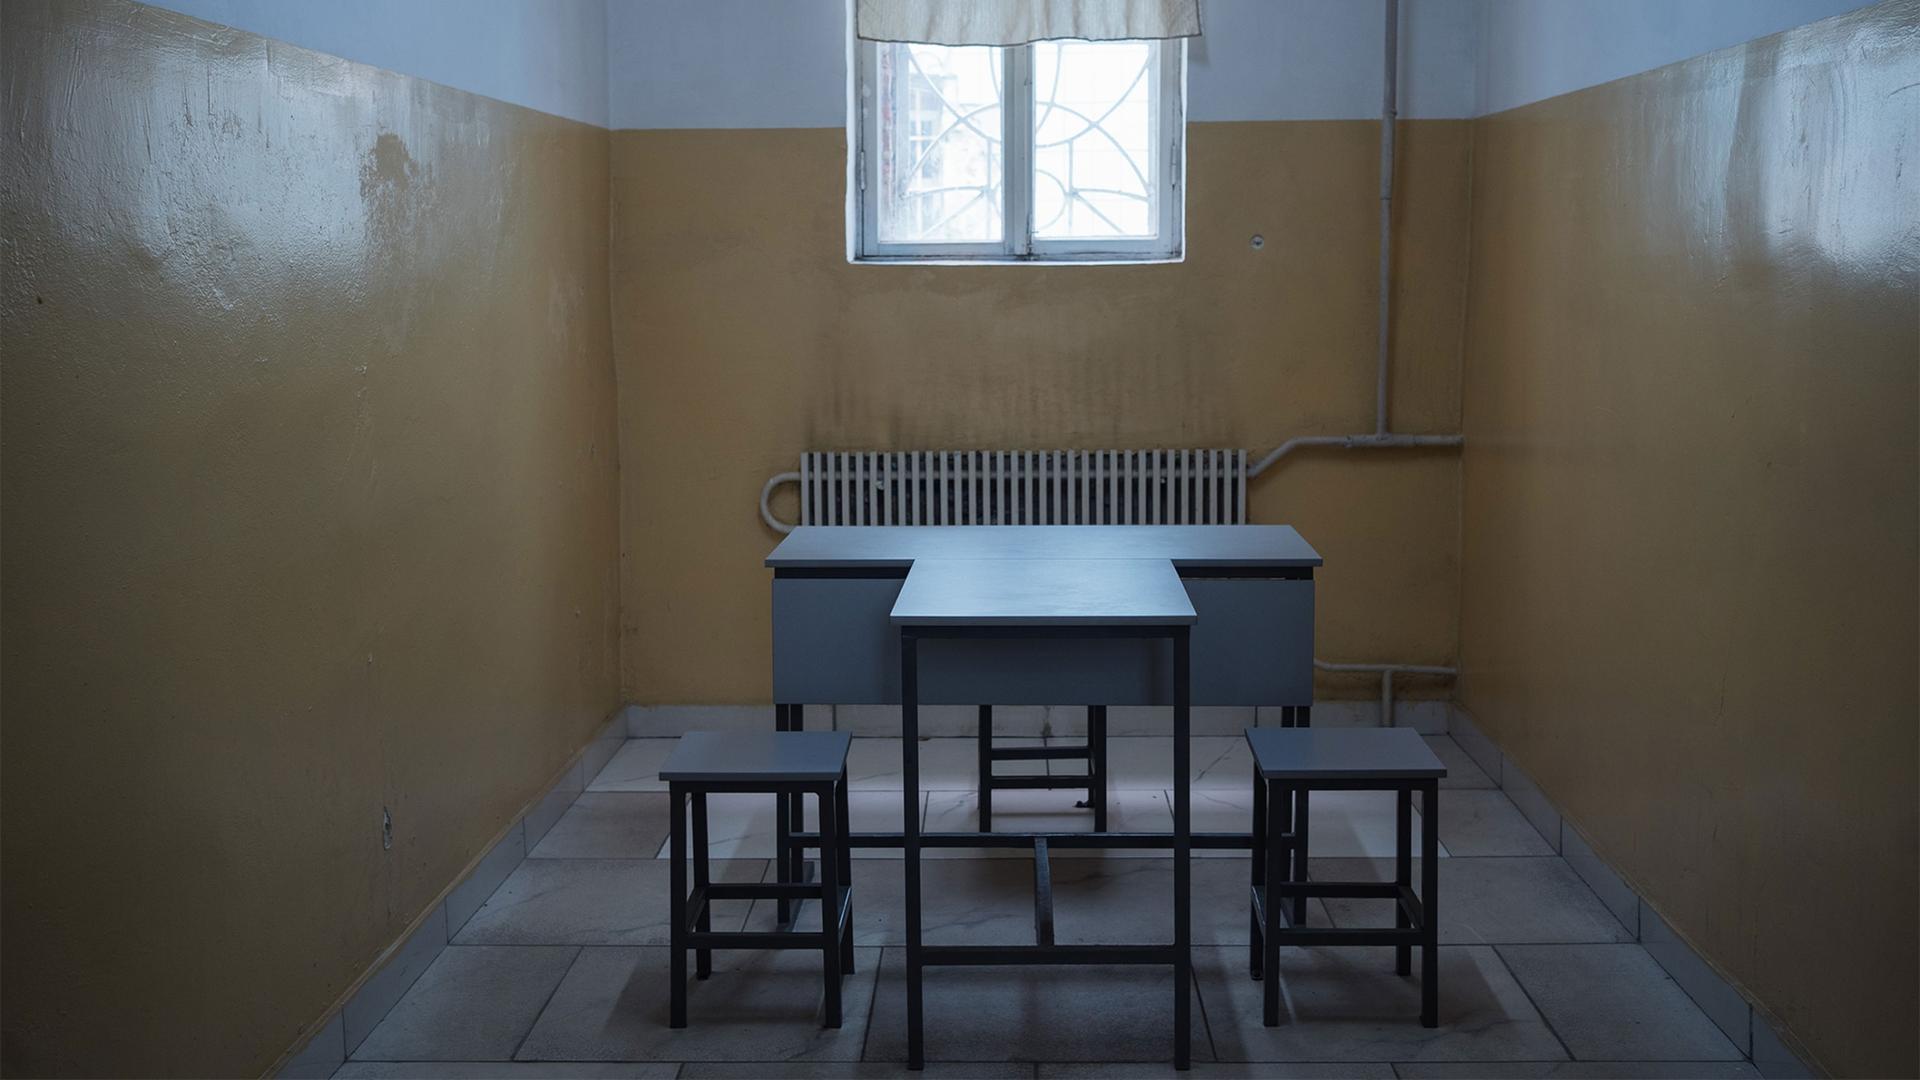 Kharkiv Pre-trial Detention Center Number 27 has a long history going back more than 170 years. The facility has a maximum capacity of around 1,500 inmates.